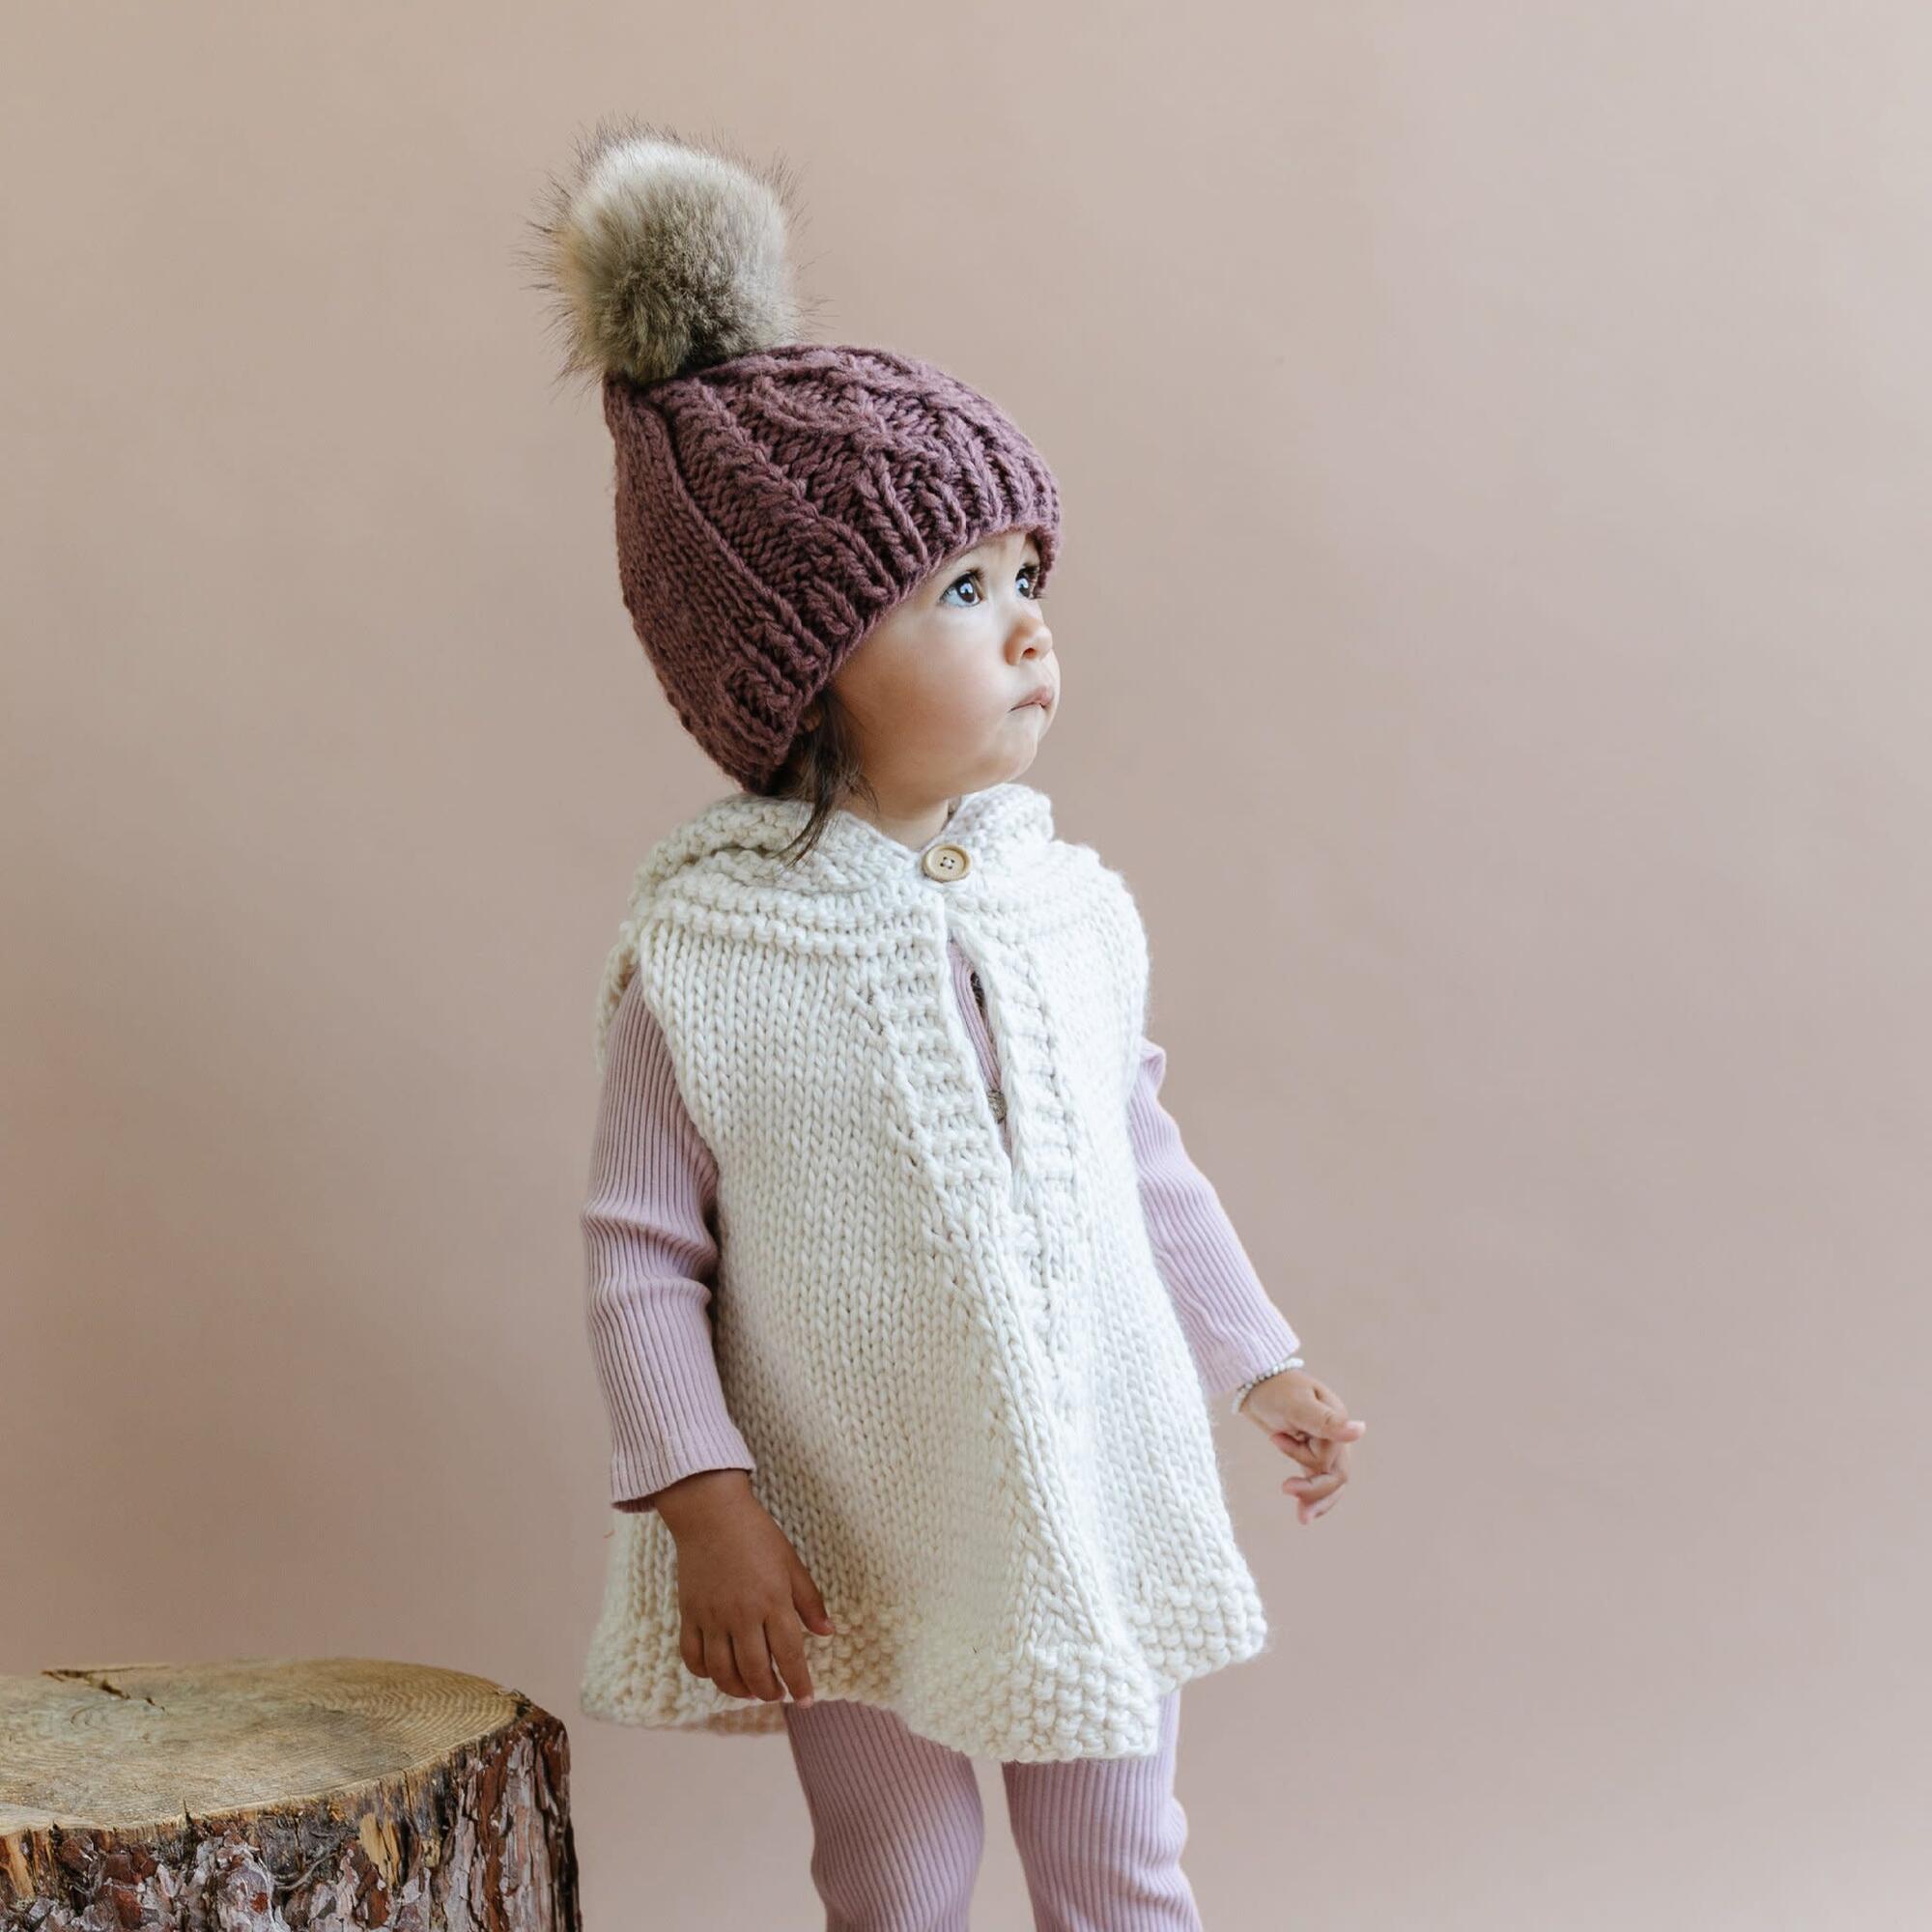 Blair Handknit Bonnet in Mauve by The Blueberry Hill